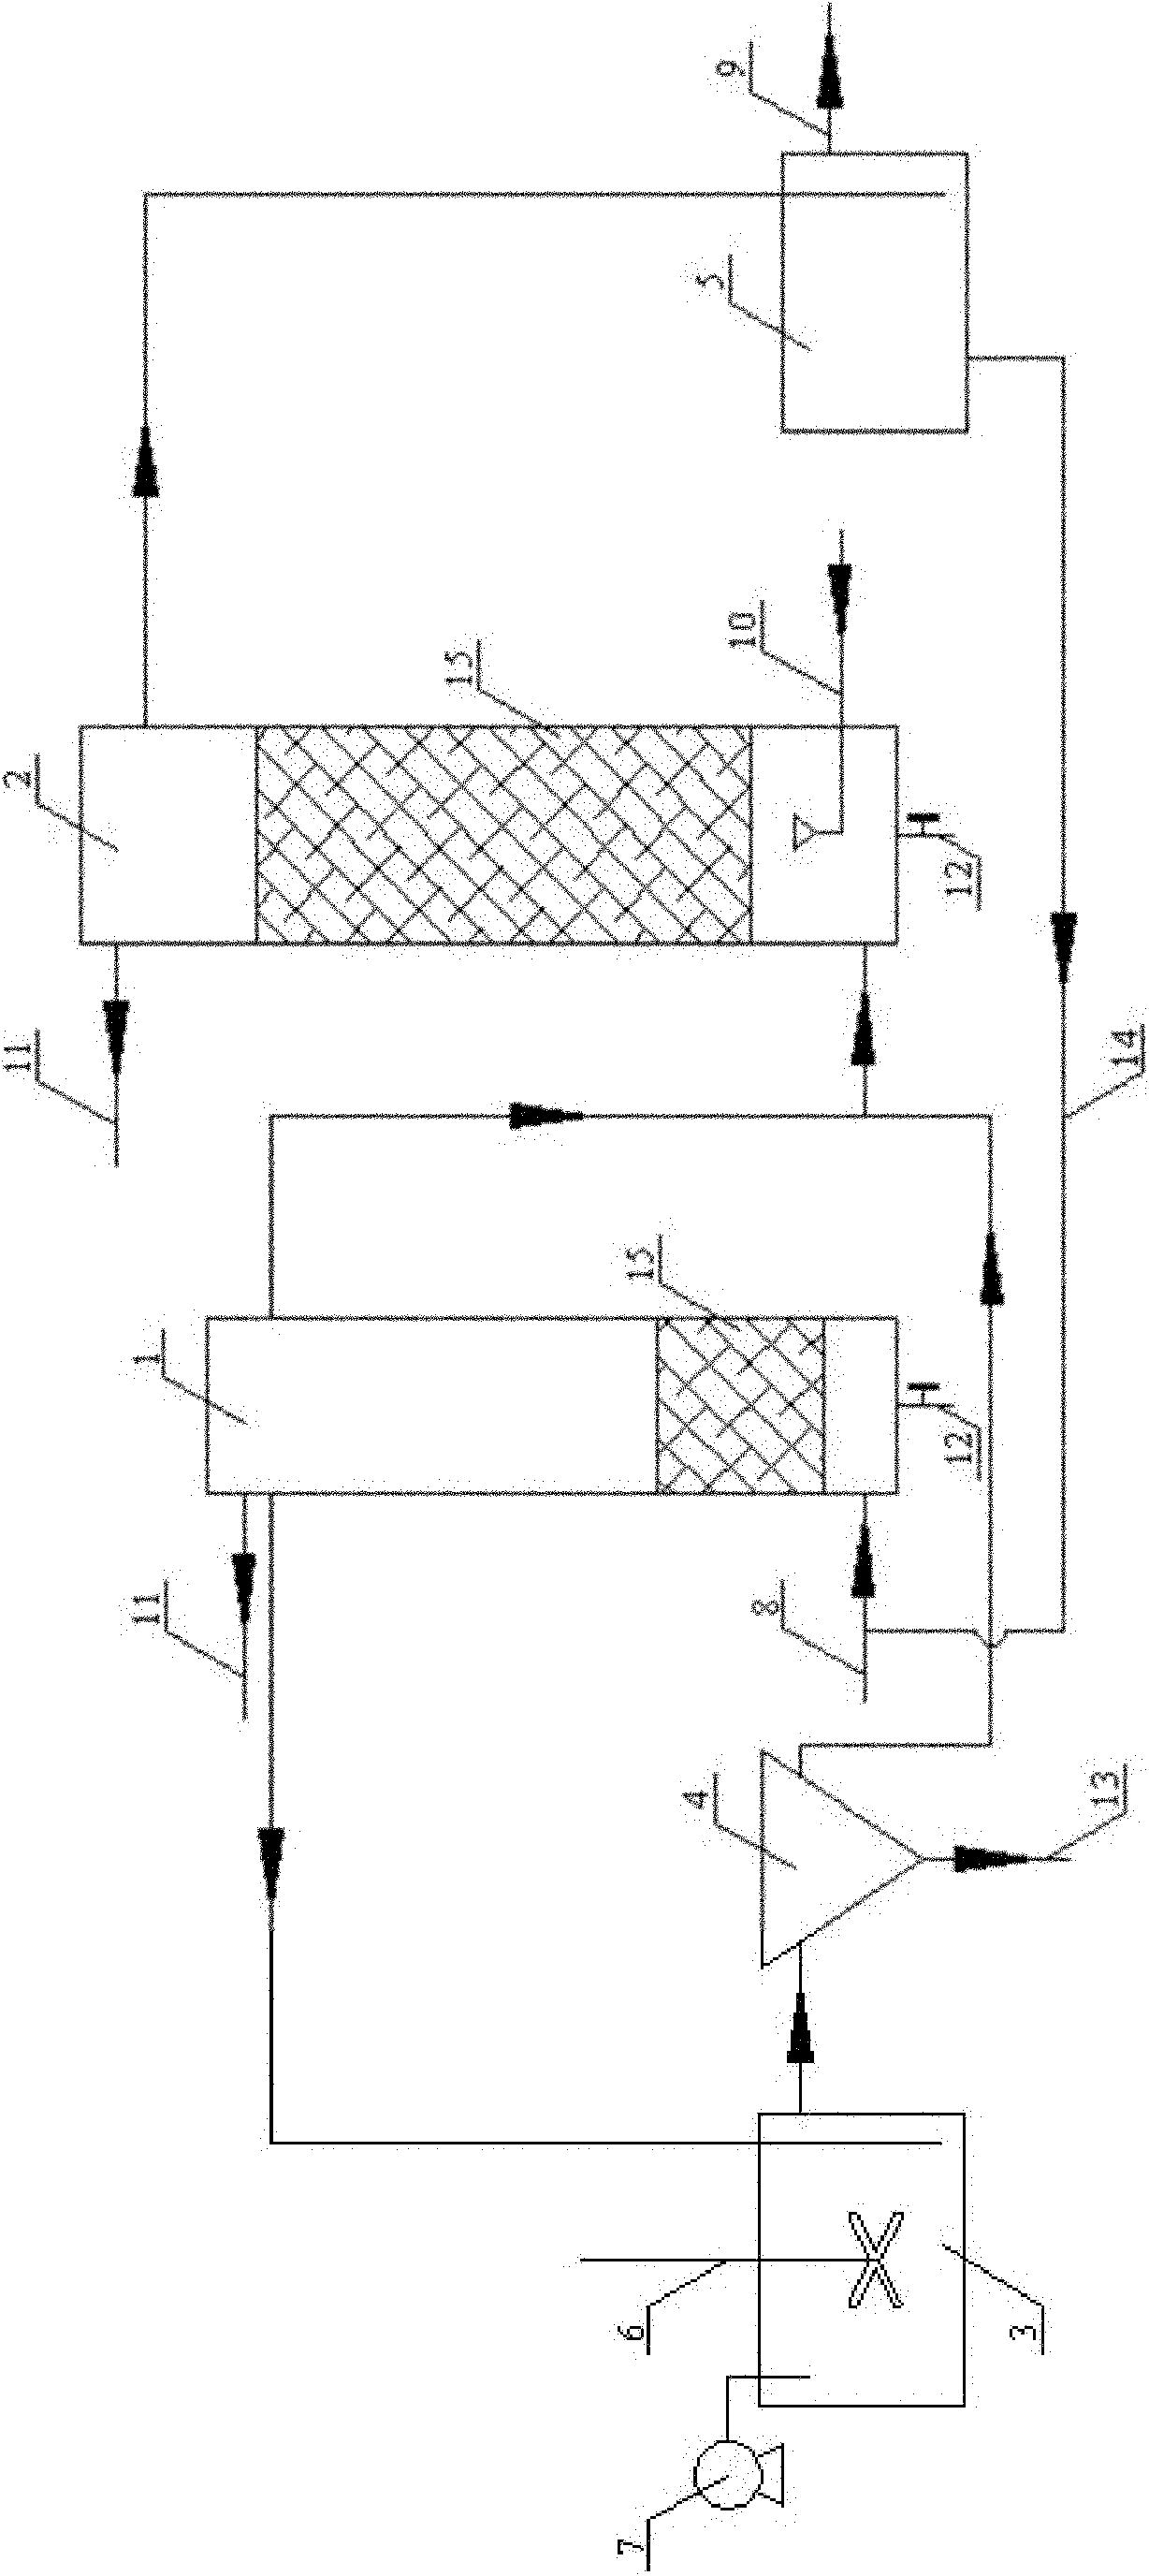 Side-flow circulation BAF (Biological Aerated Filter) intensified dephosphorization system and method for treating urban sewage with the dephosphorization system